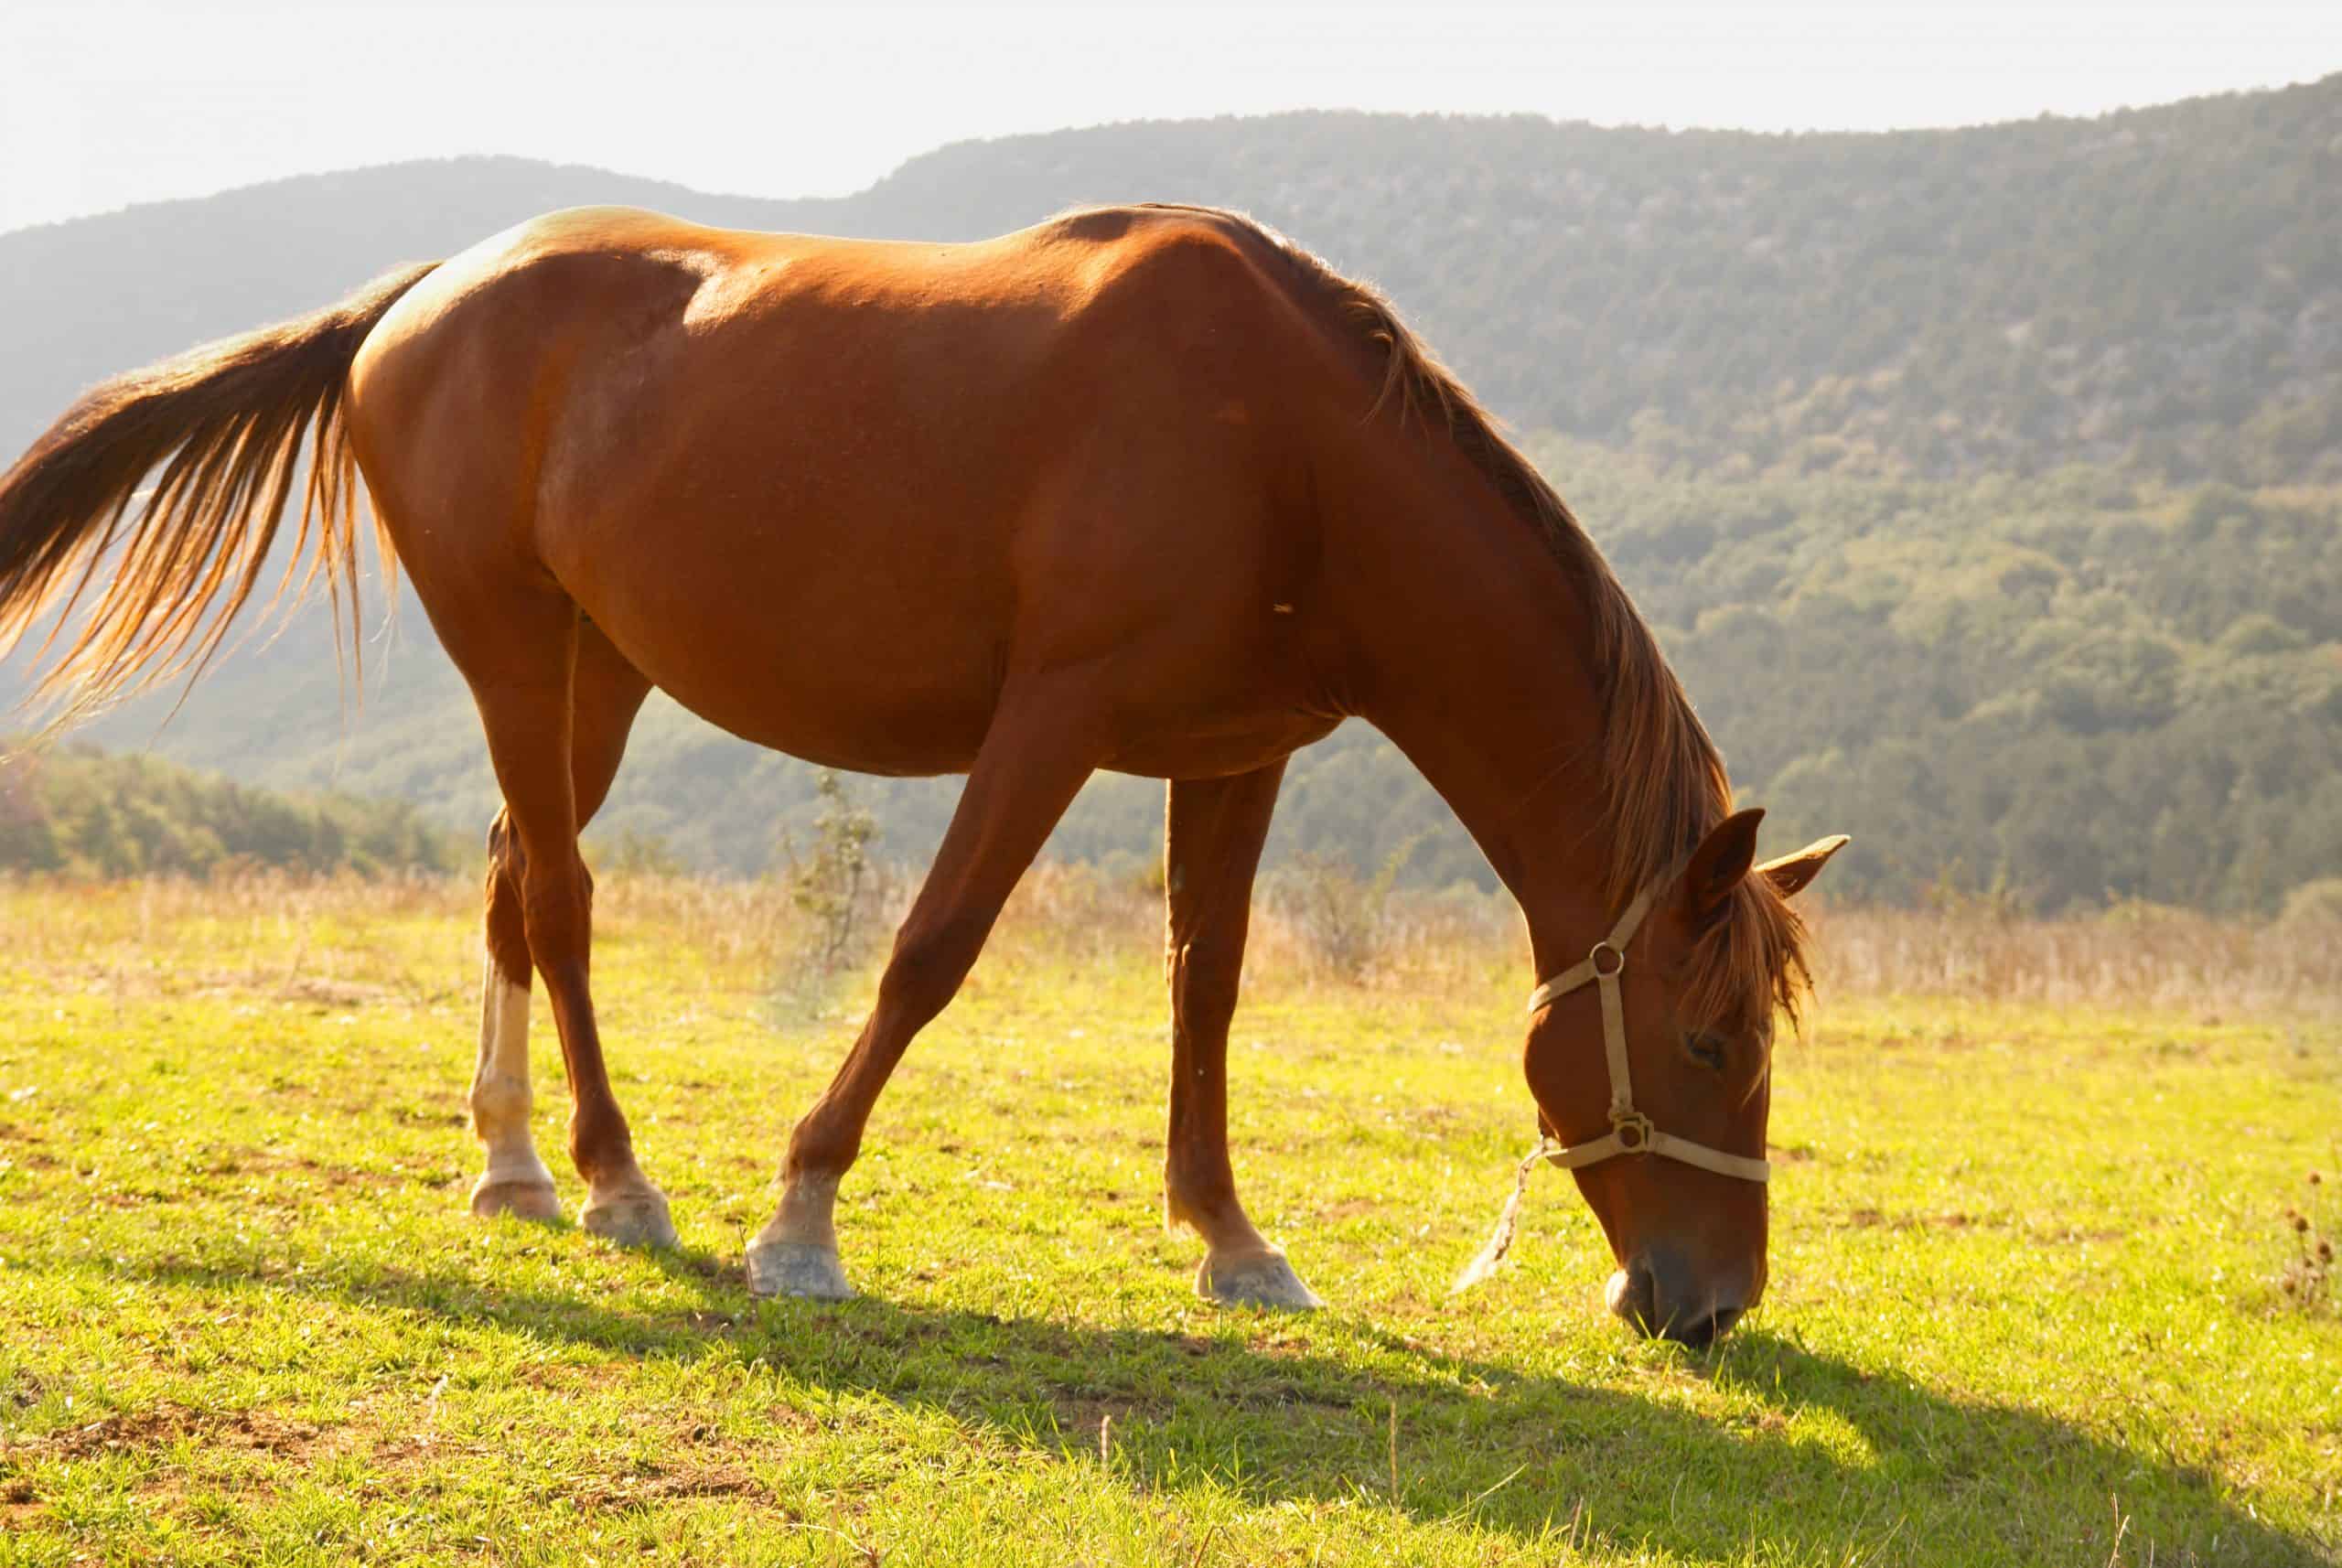 Grazing horse in the field.